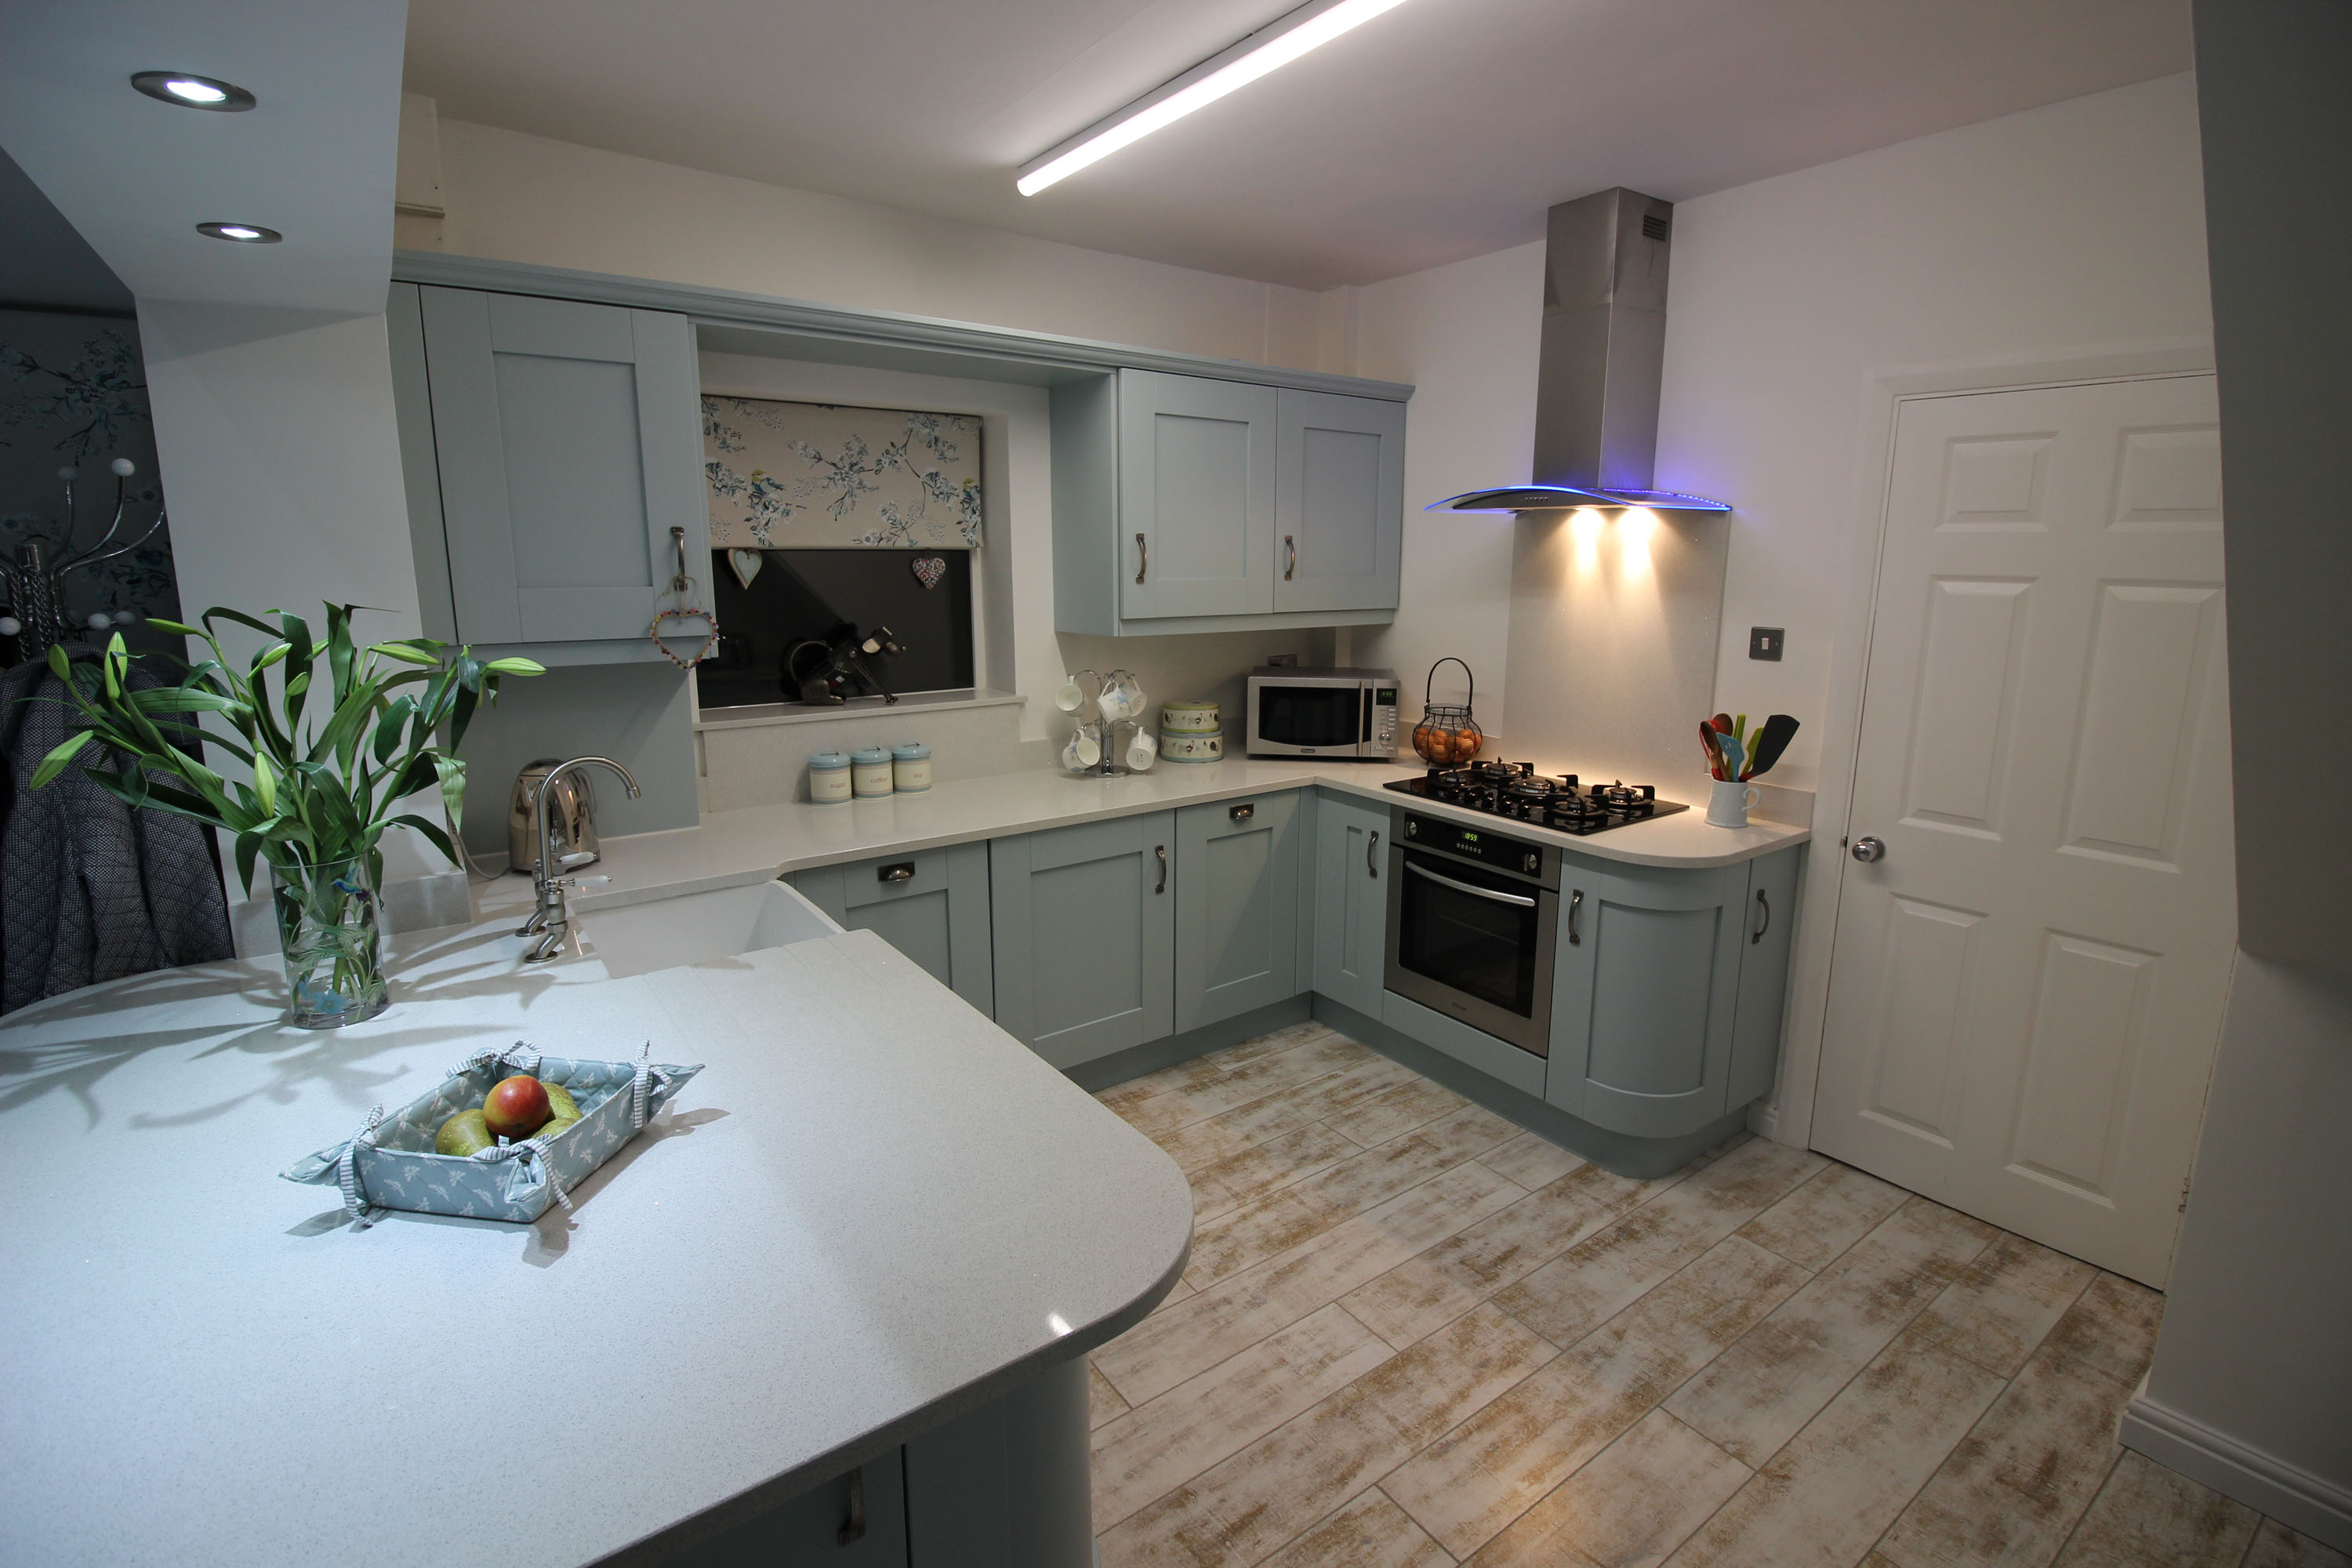 Shabby Chic Style Kitchen Featuring the Windsor Shaker Range in Painted Powder Blue